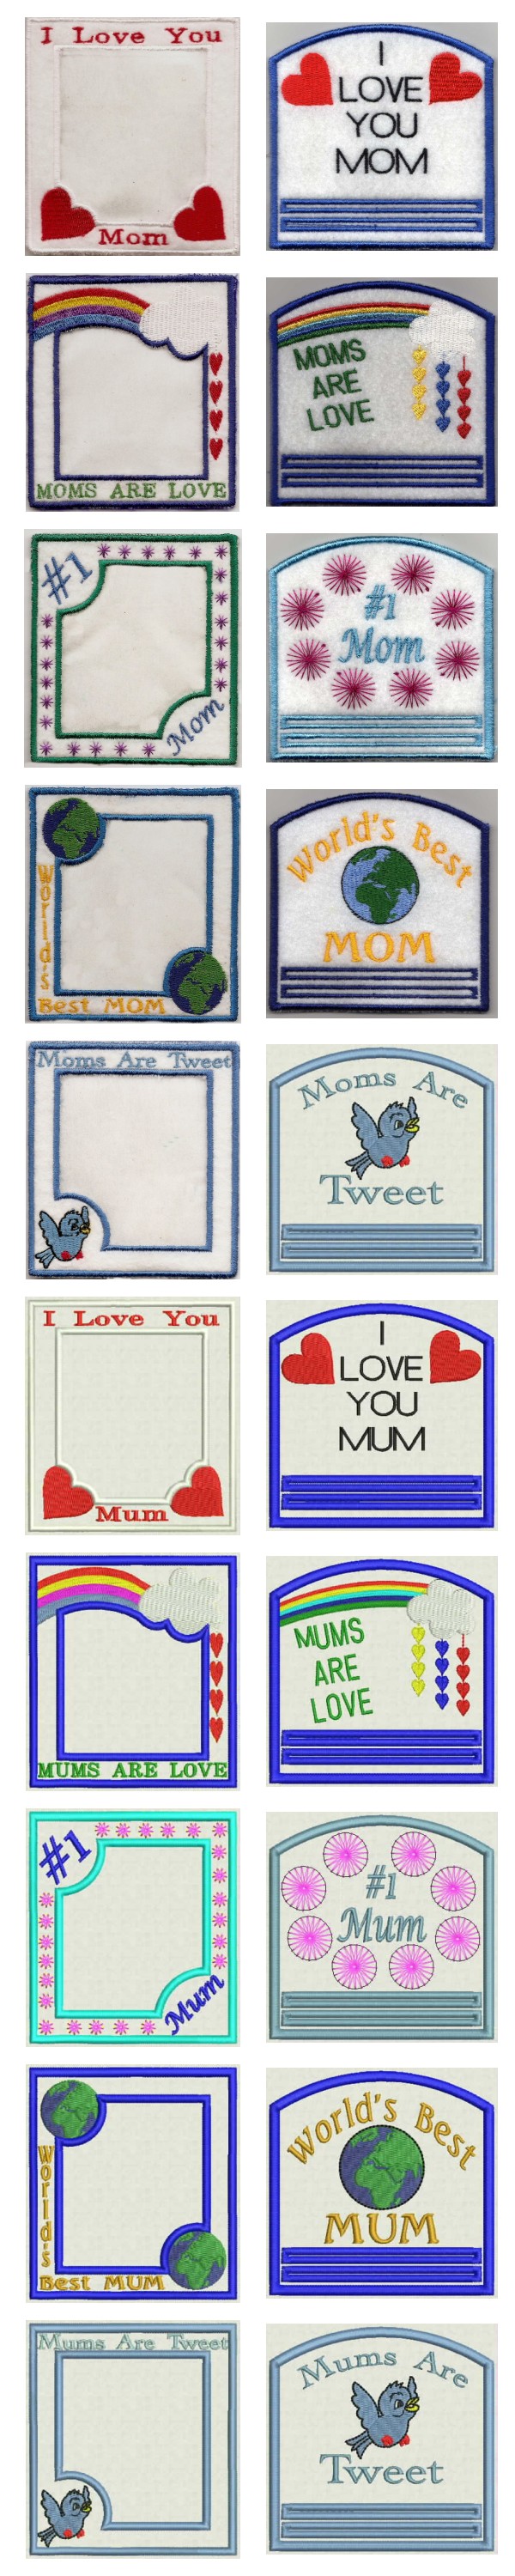 Mothers Day Photo Frames and Notepad Holders Embroidery Machine Design Details